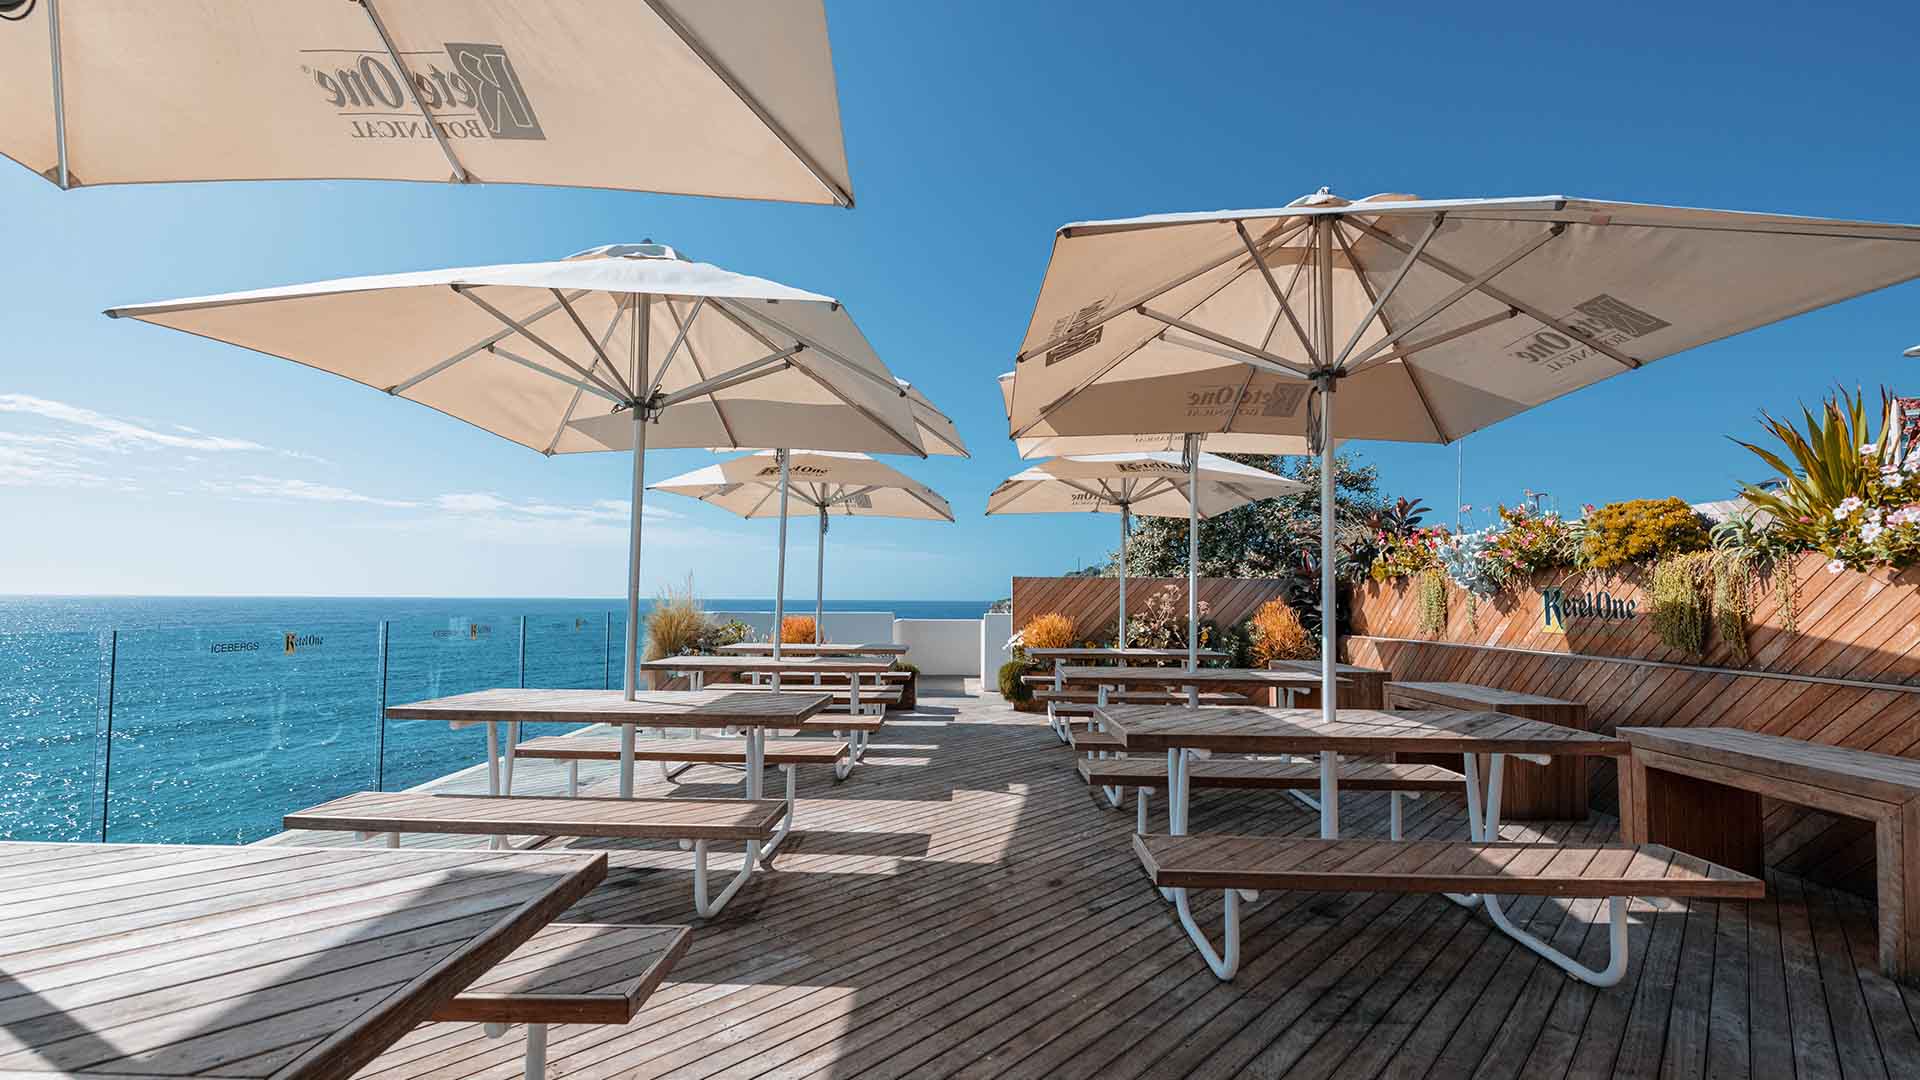 The Icebergs Terrace Has Transformed Into a Lush Pop-Up Bar Overlooking Bondi Beach for Another Summer